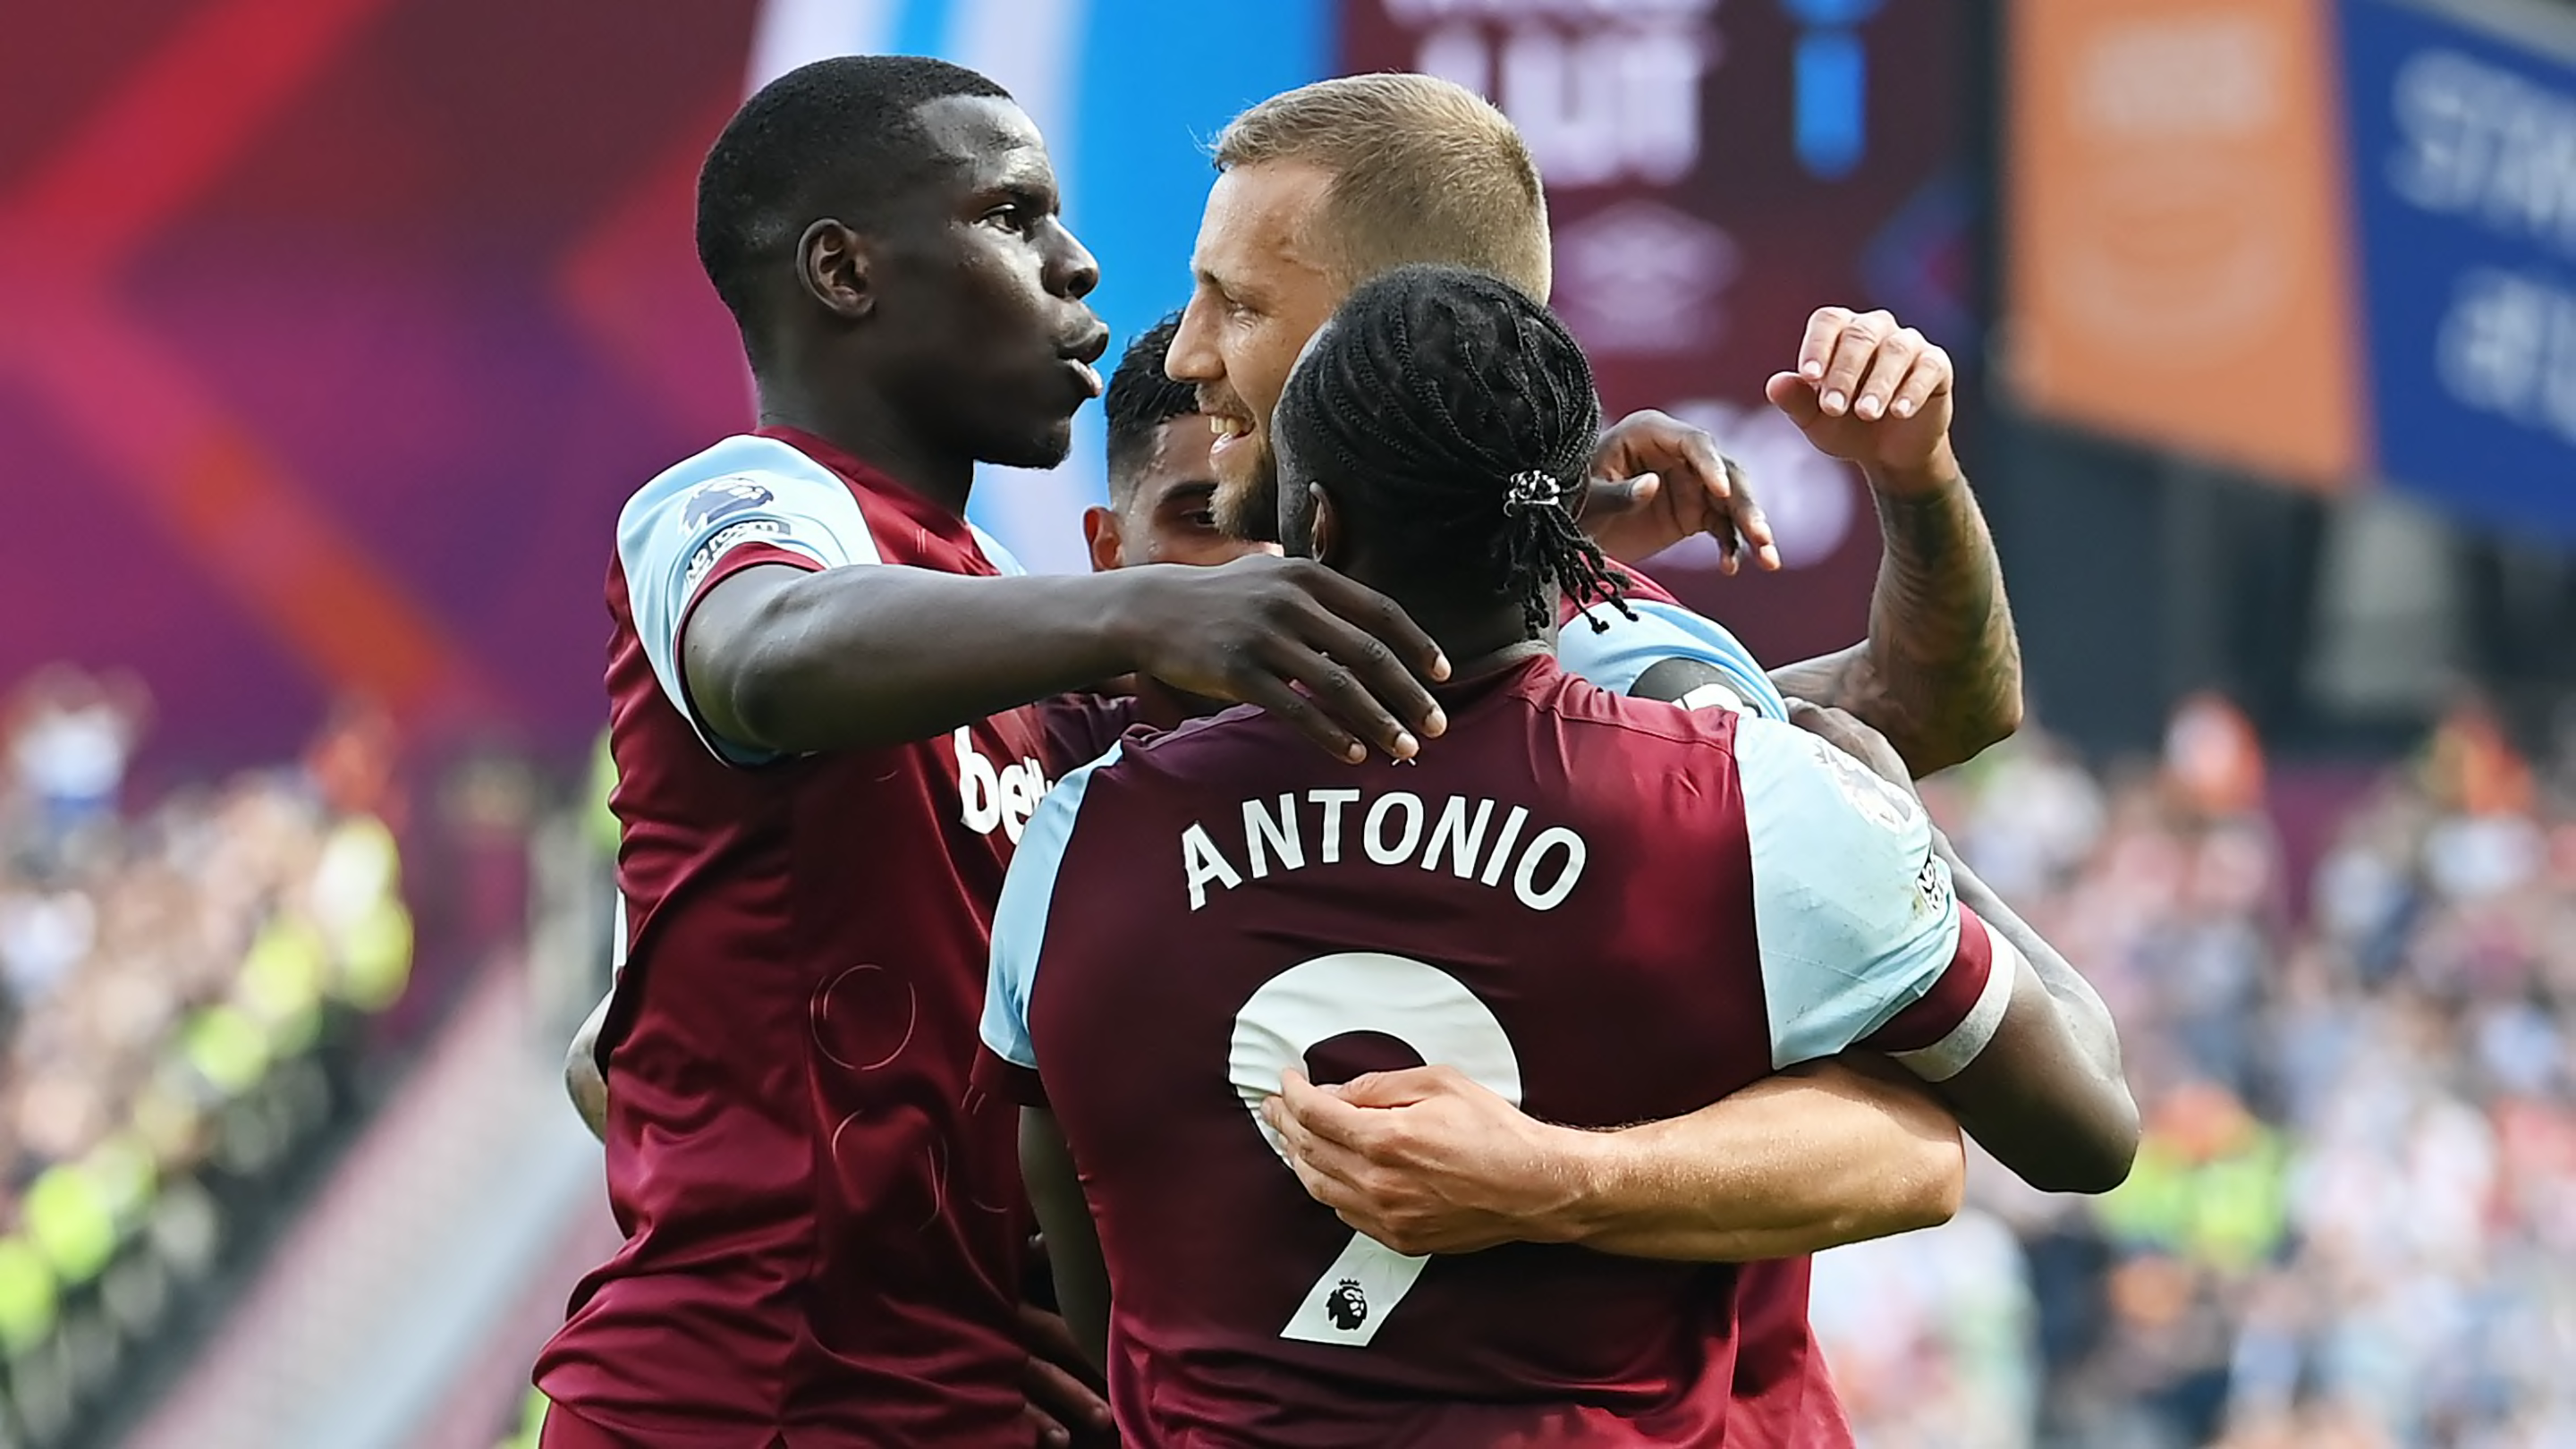 West Ham 3-1 Luton: Player ratings as Hatters near relegation